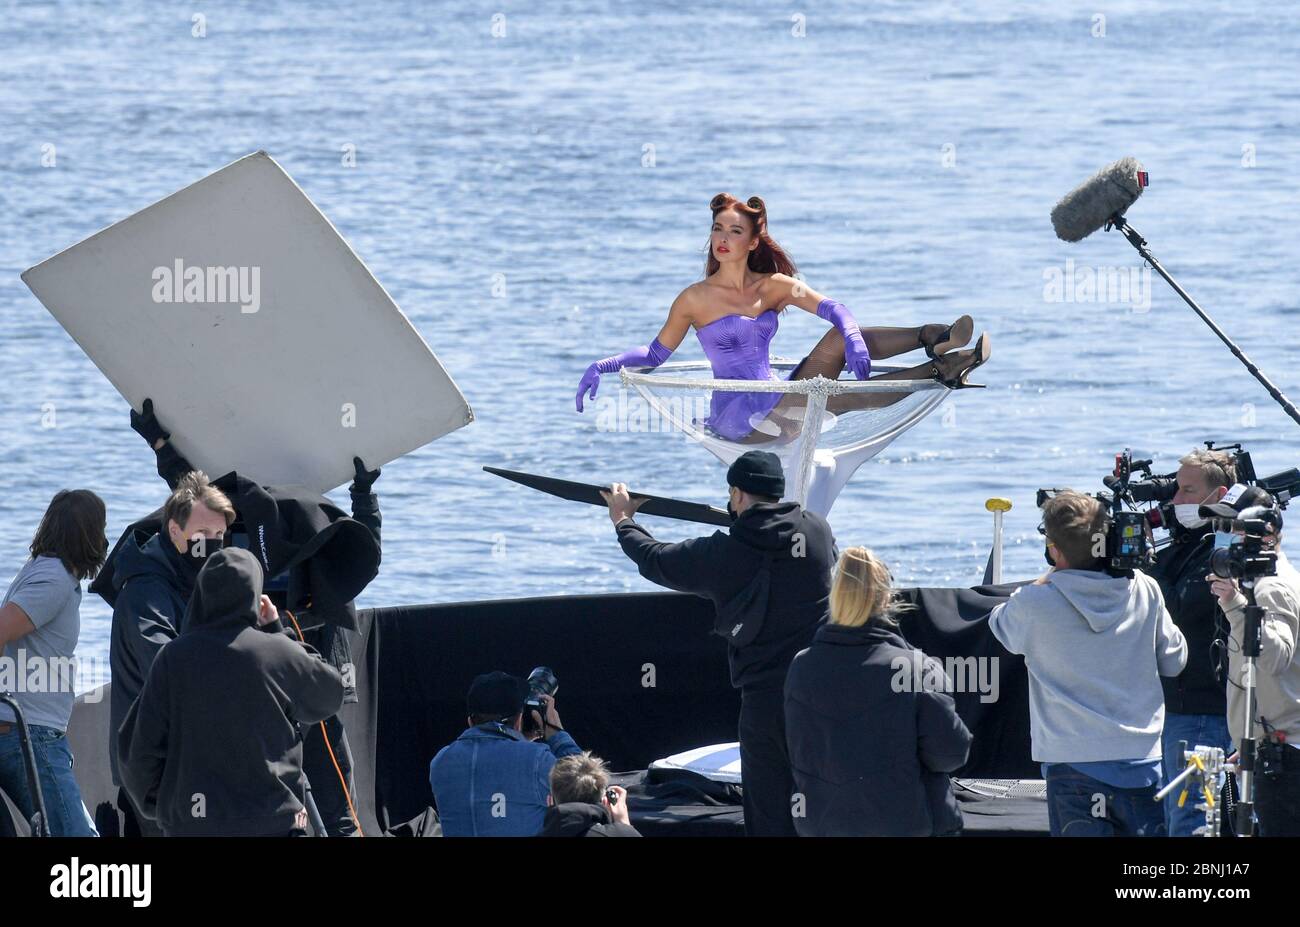 Berlin, Germany. 15th May, 2020. Jacky, finalist of the casting show  Germany's Next Topmodel, poses on a boat on the Spree during shooting for  the final show of the 15th season. The